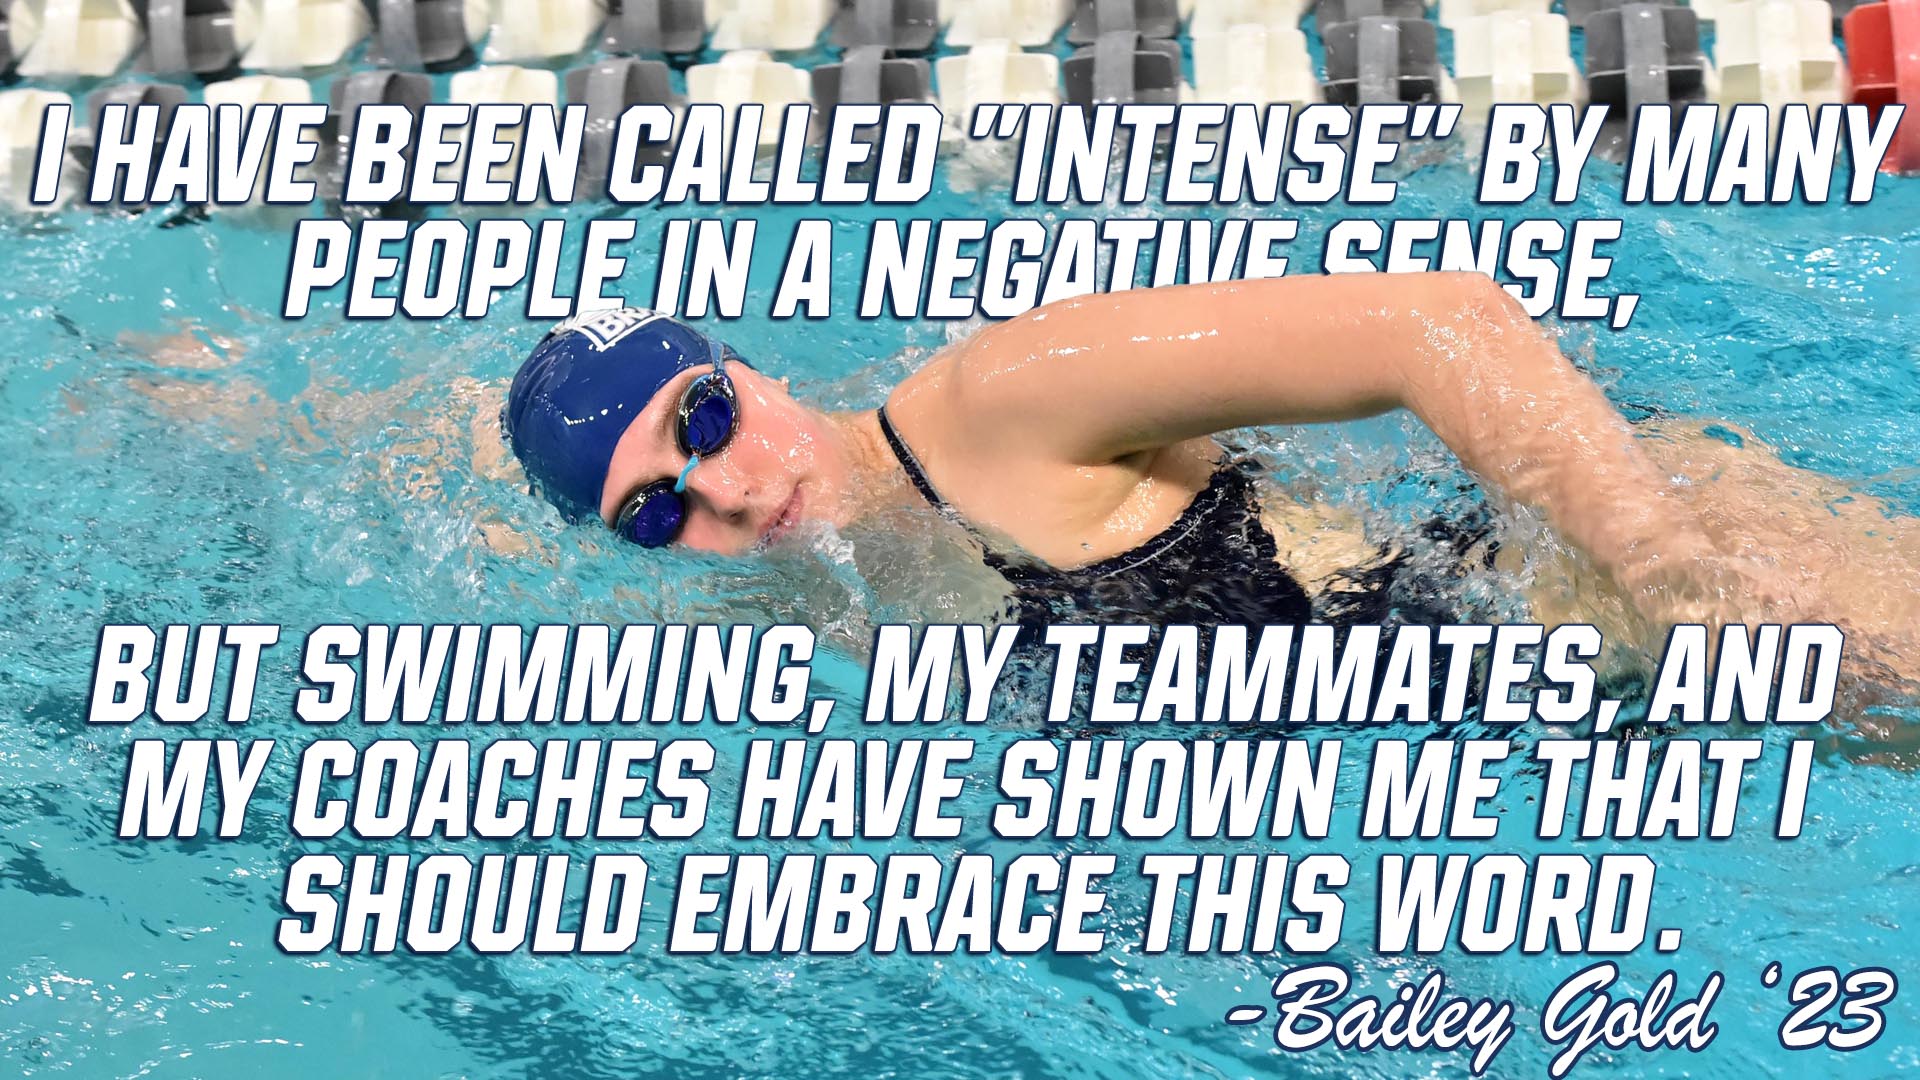 Swimmer Bailey Gold: I have been called "intense" by many people in a negative sense, but swimming, my teammates and my coaches have shown me that I should embrace this word. 